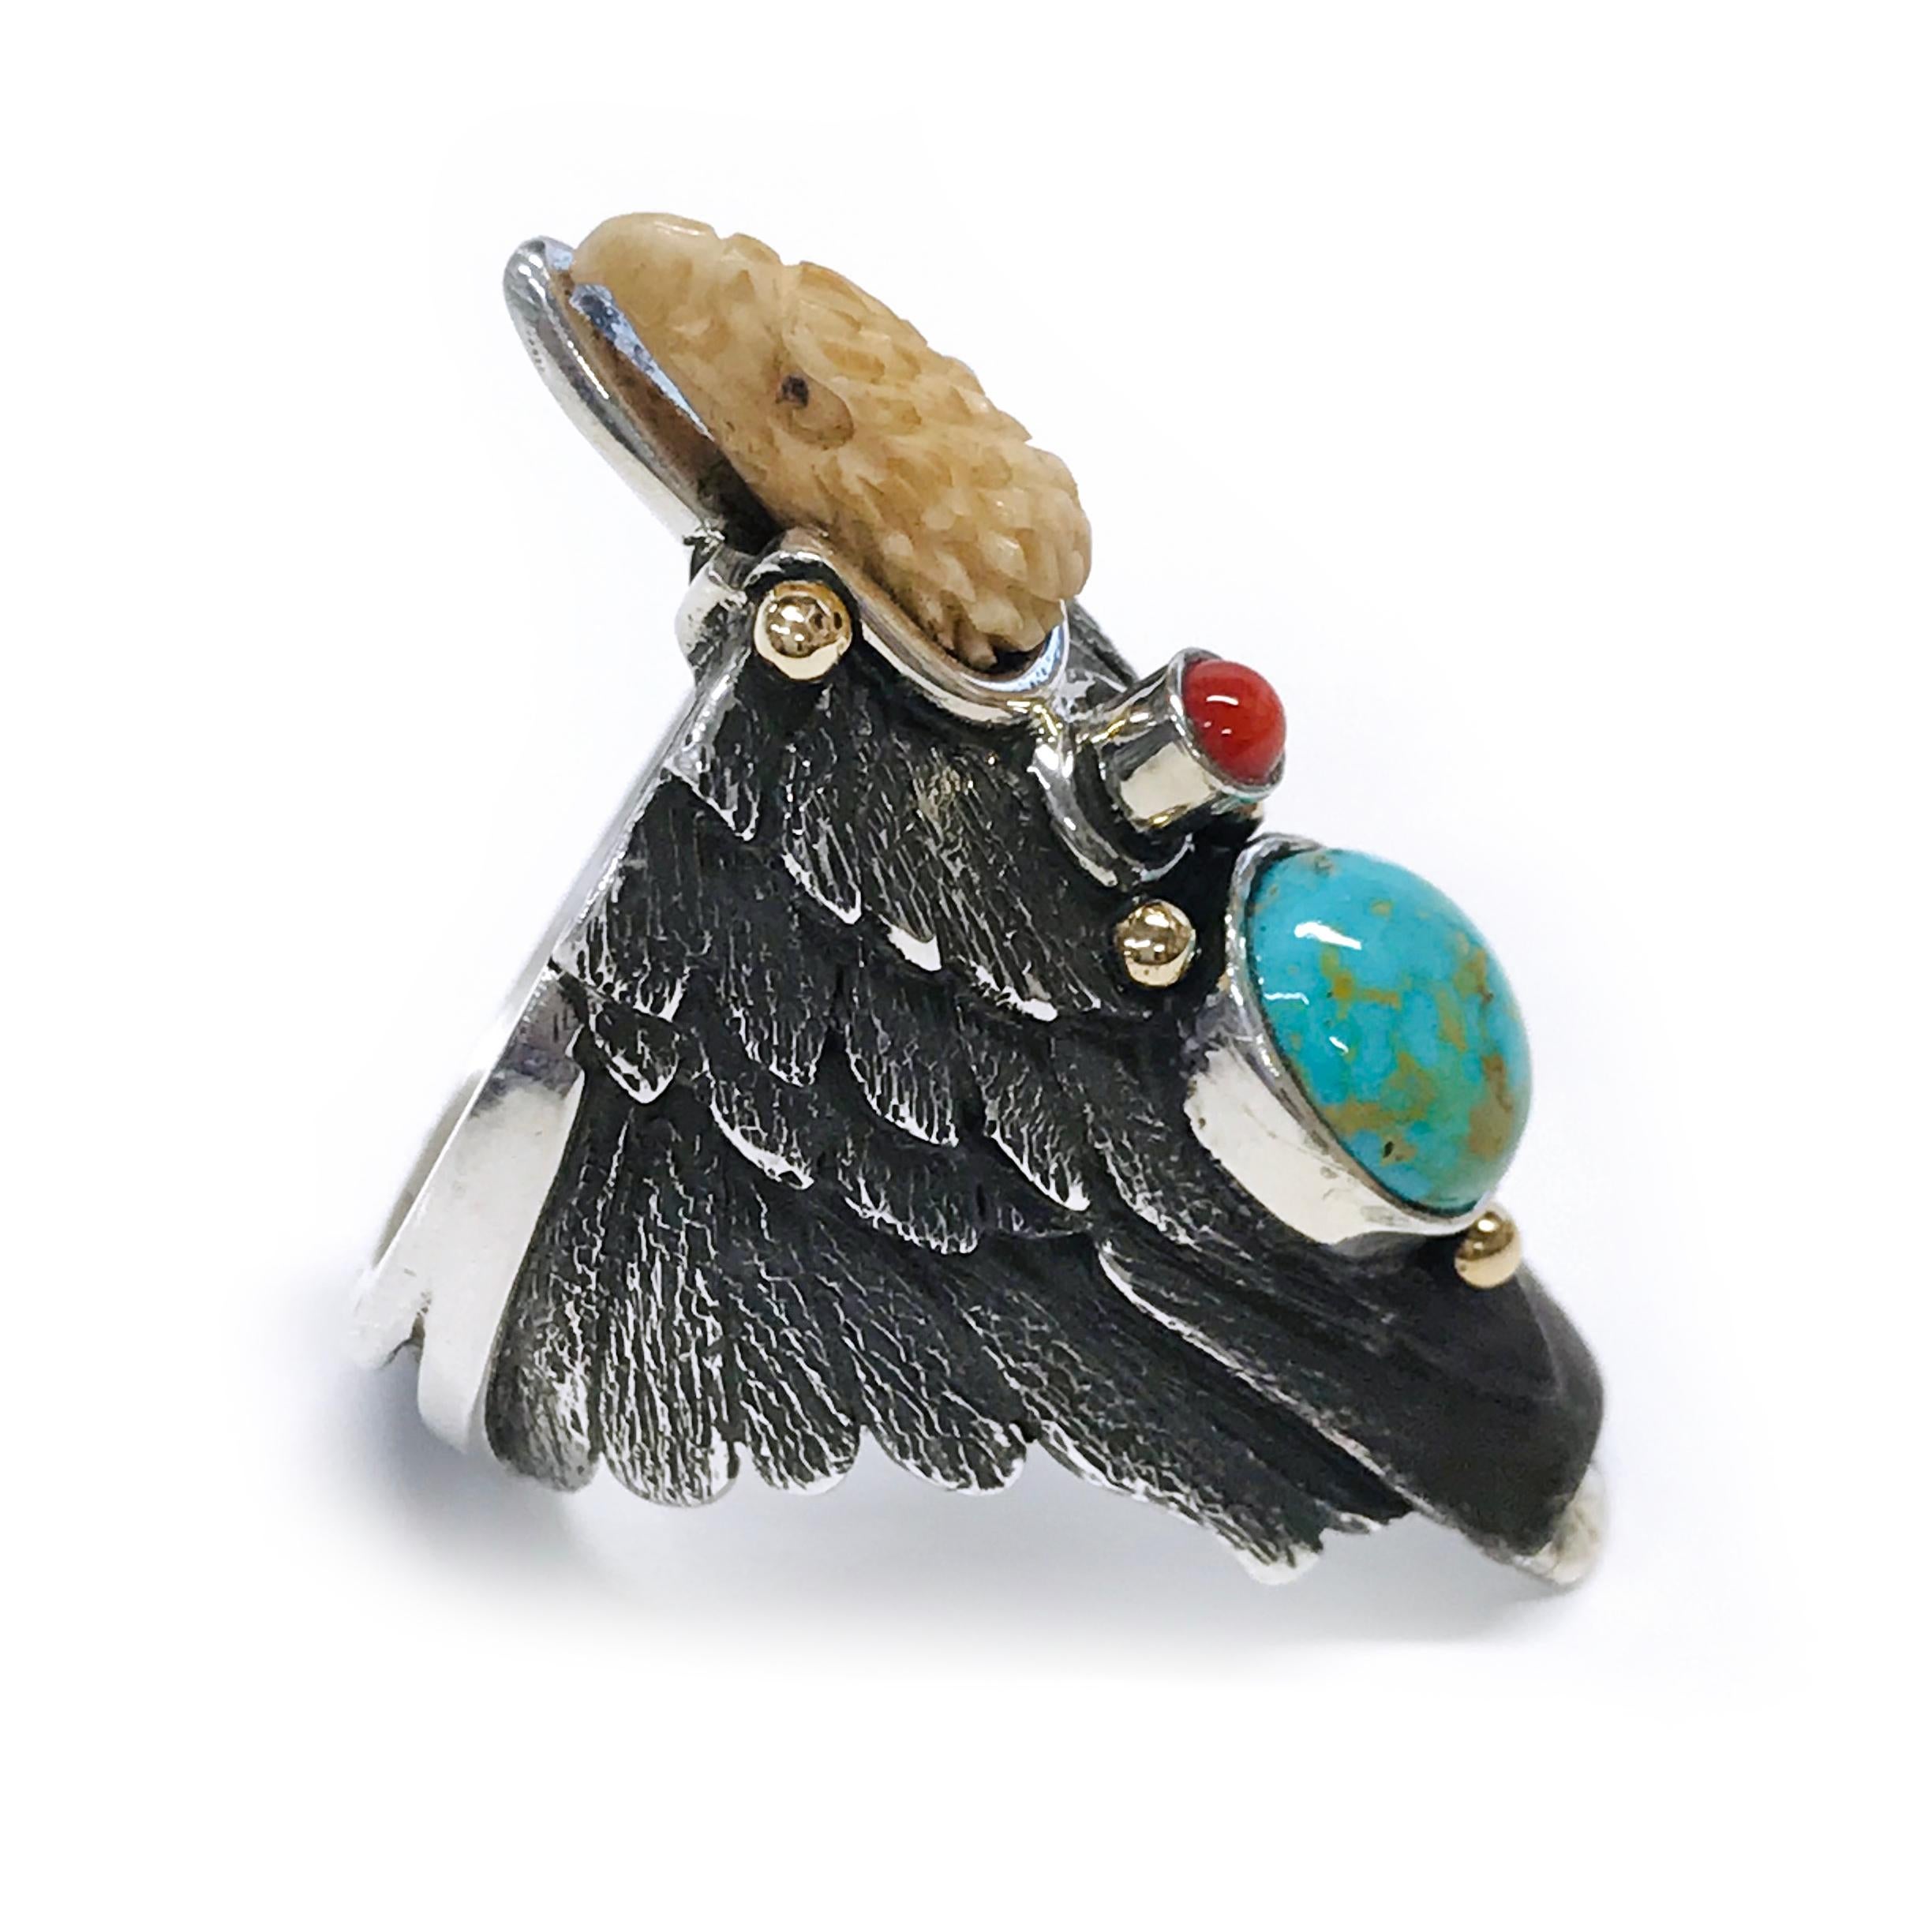 Handcrafted from Sterling Silver with 14k accents by jewelry maker, Ray Winner. This absolutely glorious ring features a natural Blue Royston Turquoise oval cabochon and Mediterranean Coral round cabochon bezel set. The form of the ring band is